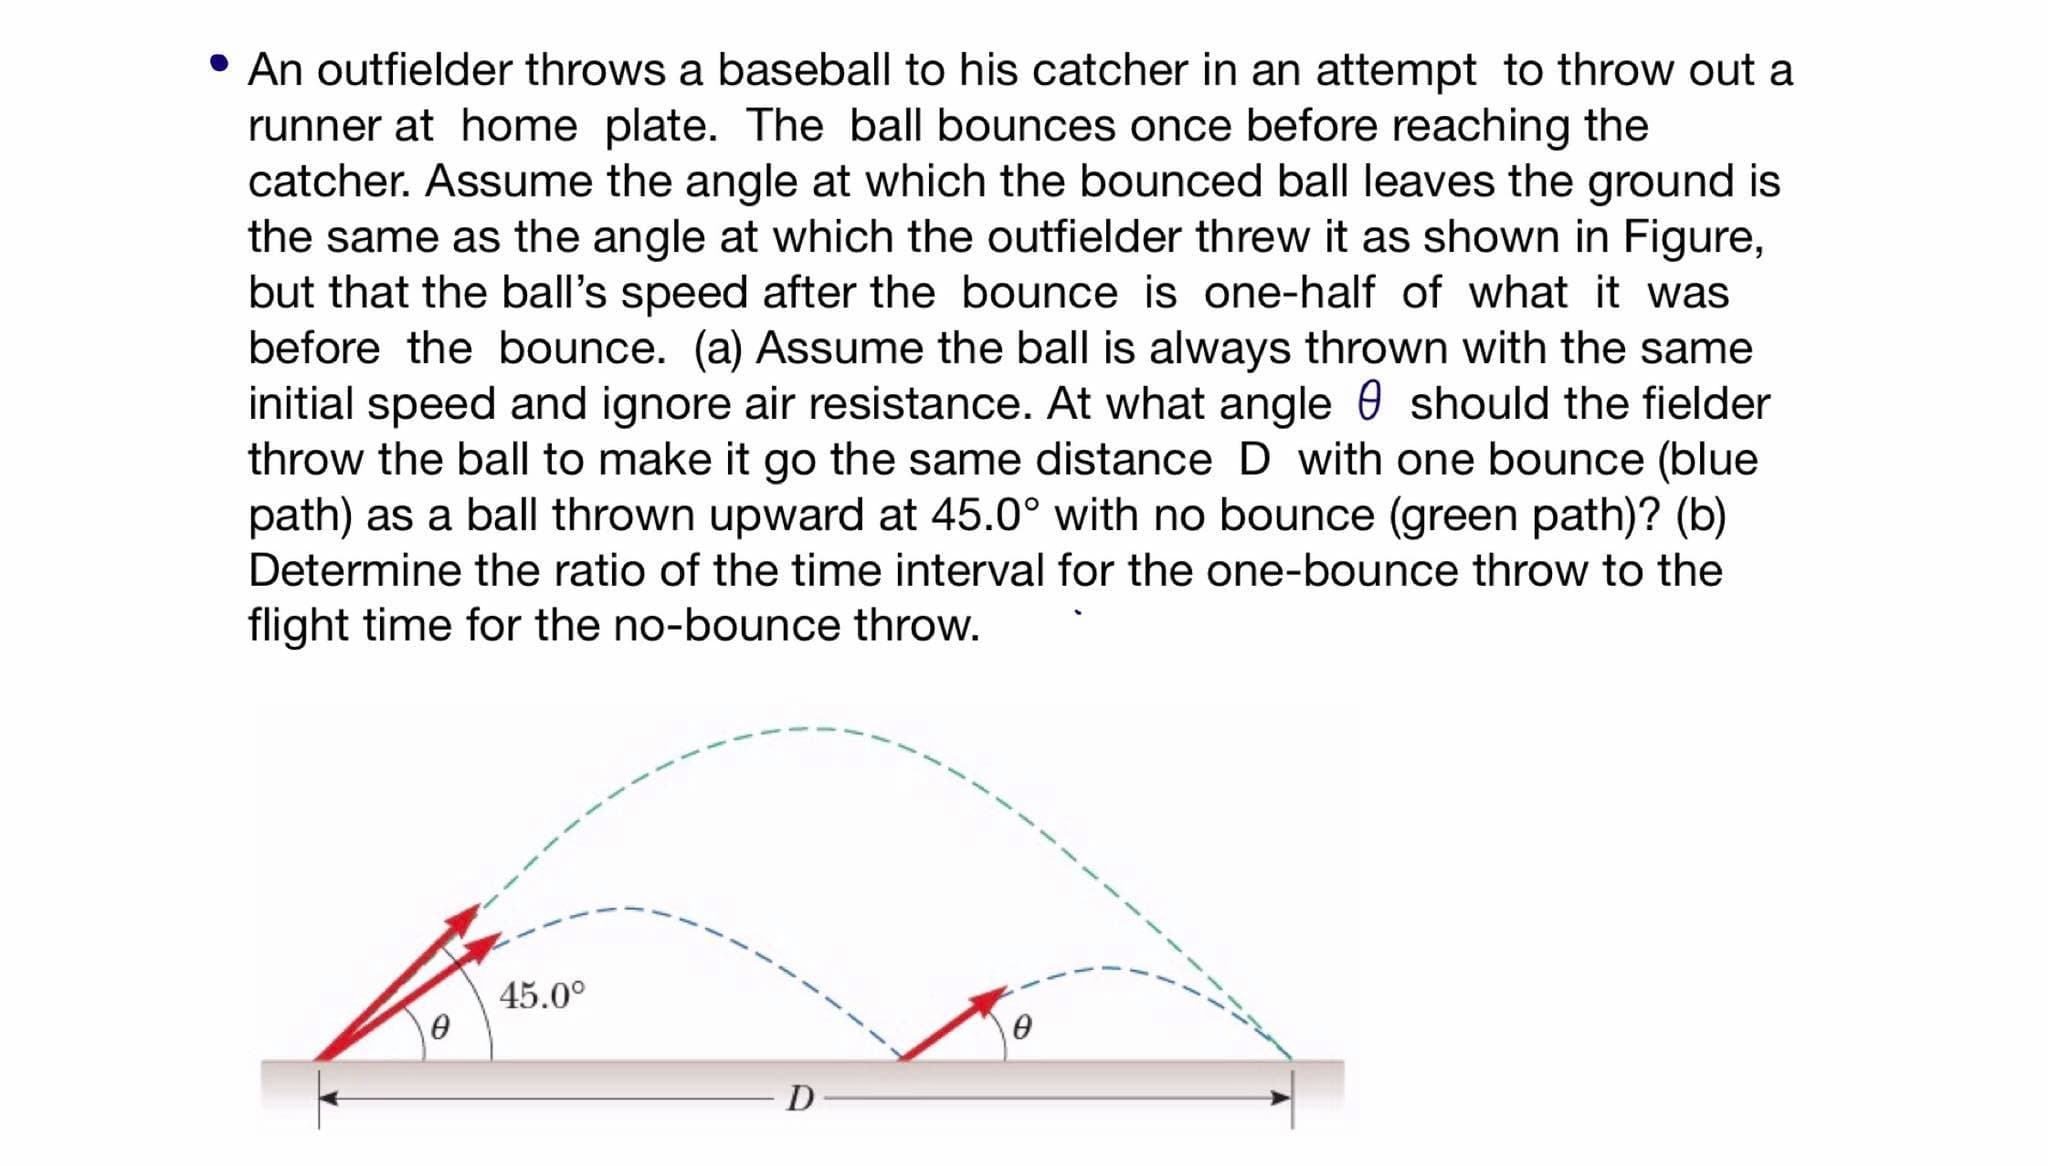 An outfielder throws a baseball to his catcher in an attempt to throw out a
runner at home plate. The ball bounces once before reaching the
catcher. Assume the angle at which the bounced ball leaves the ground is
the same as the angle at which the outfielder threw it as shown in Figure,
but that the ball's speed after the bounce is one-half of what it was
before the bounce. (a) Assume the ball is always thrown with the same
initial speed and ignore air resistance. At what angle 0 should the fielder
throw the ball to make it go the same distance D with one bounce (blue
path) as a ball thrown upward at 45.0° with no bounce (green path)? (b)
